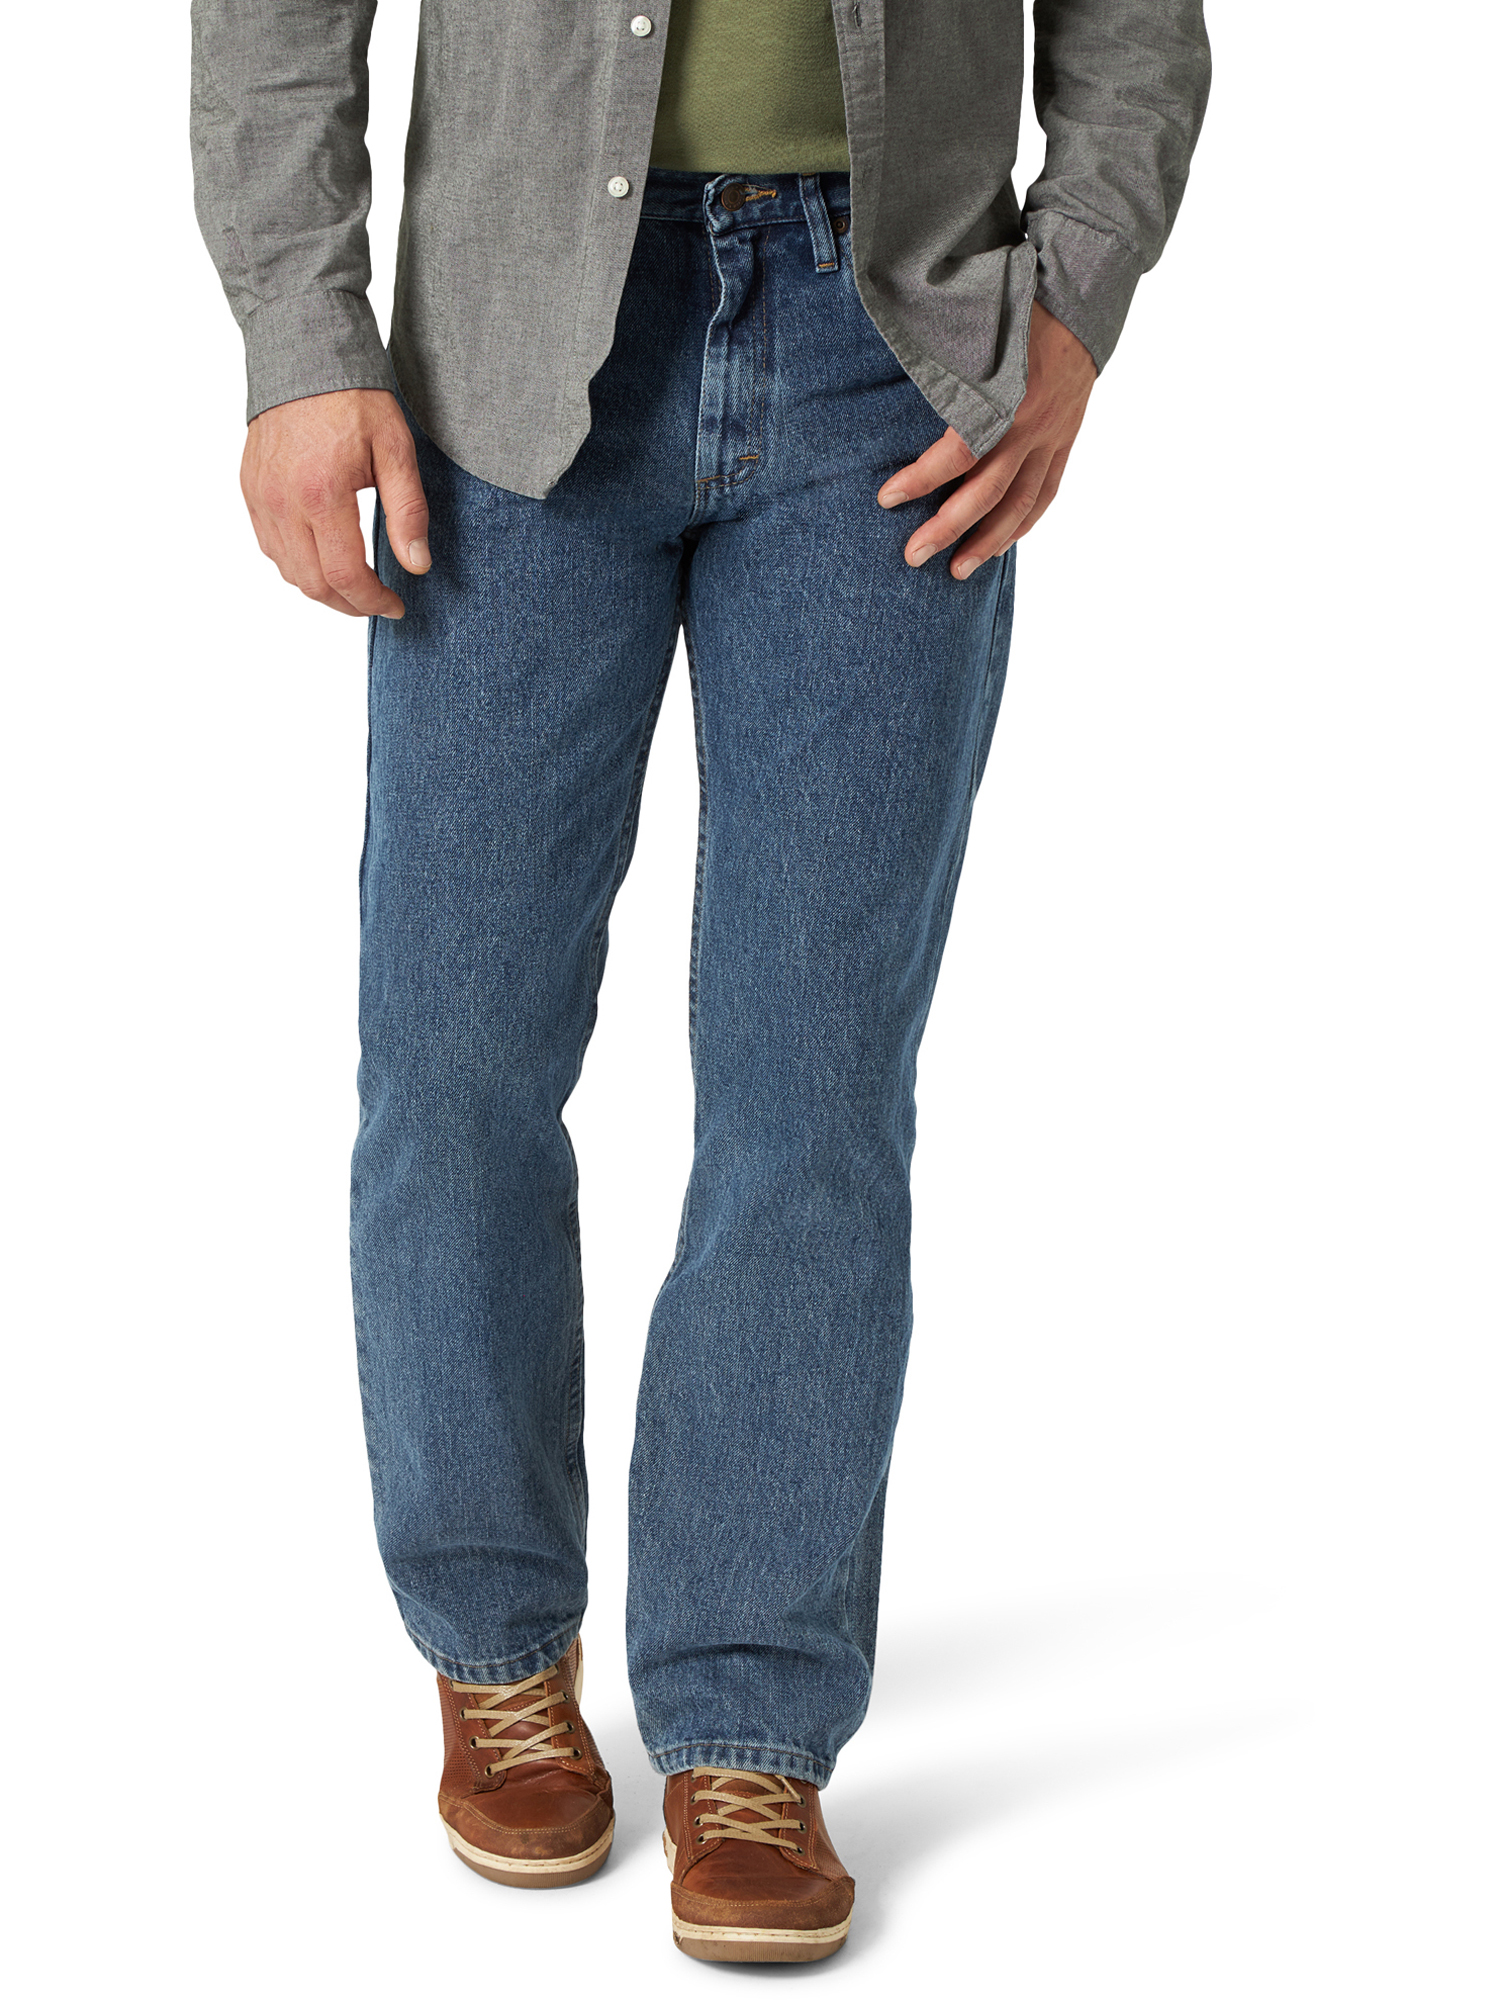 Wrangler Men's and Big Men's Relaxed Fit Jeans - image 1 of 5